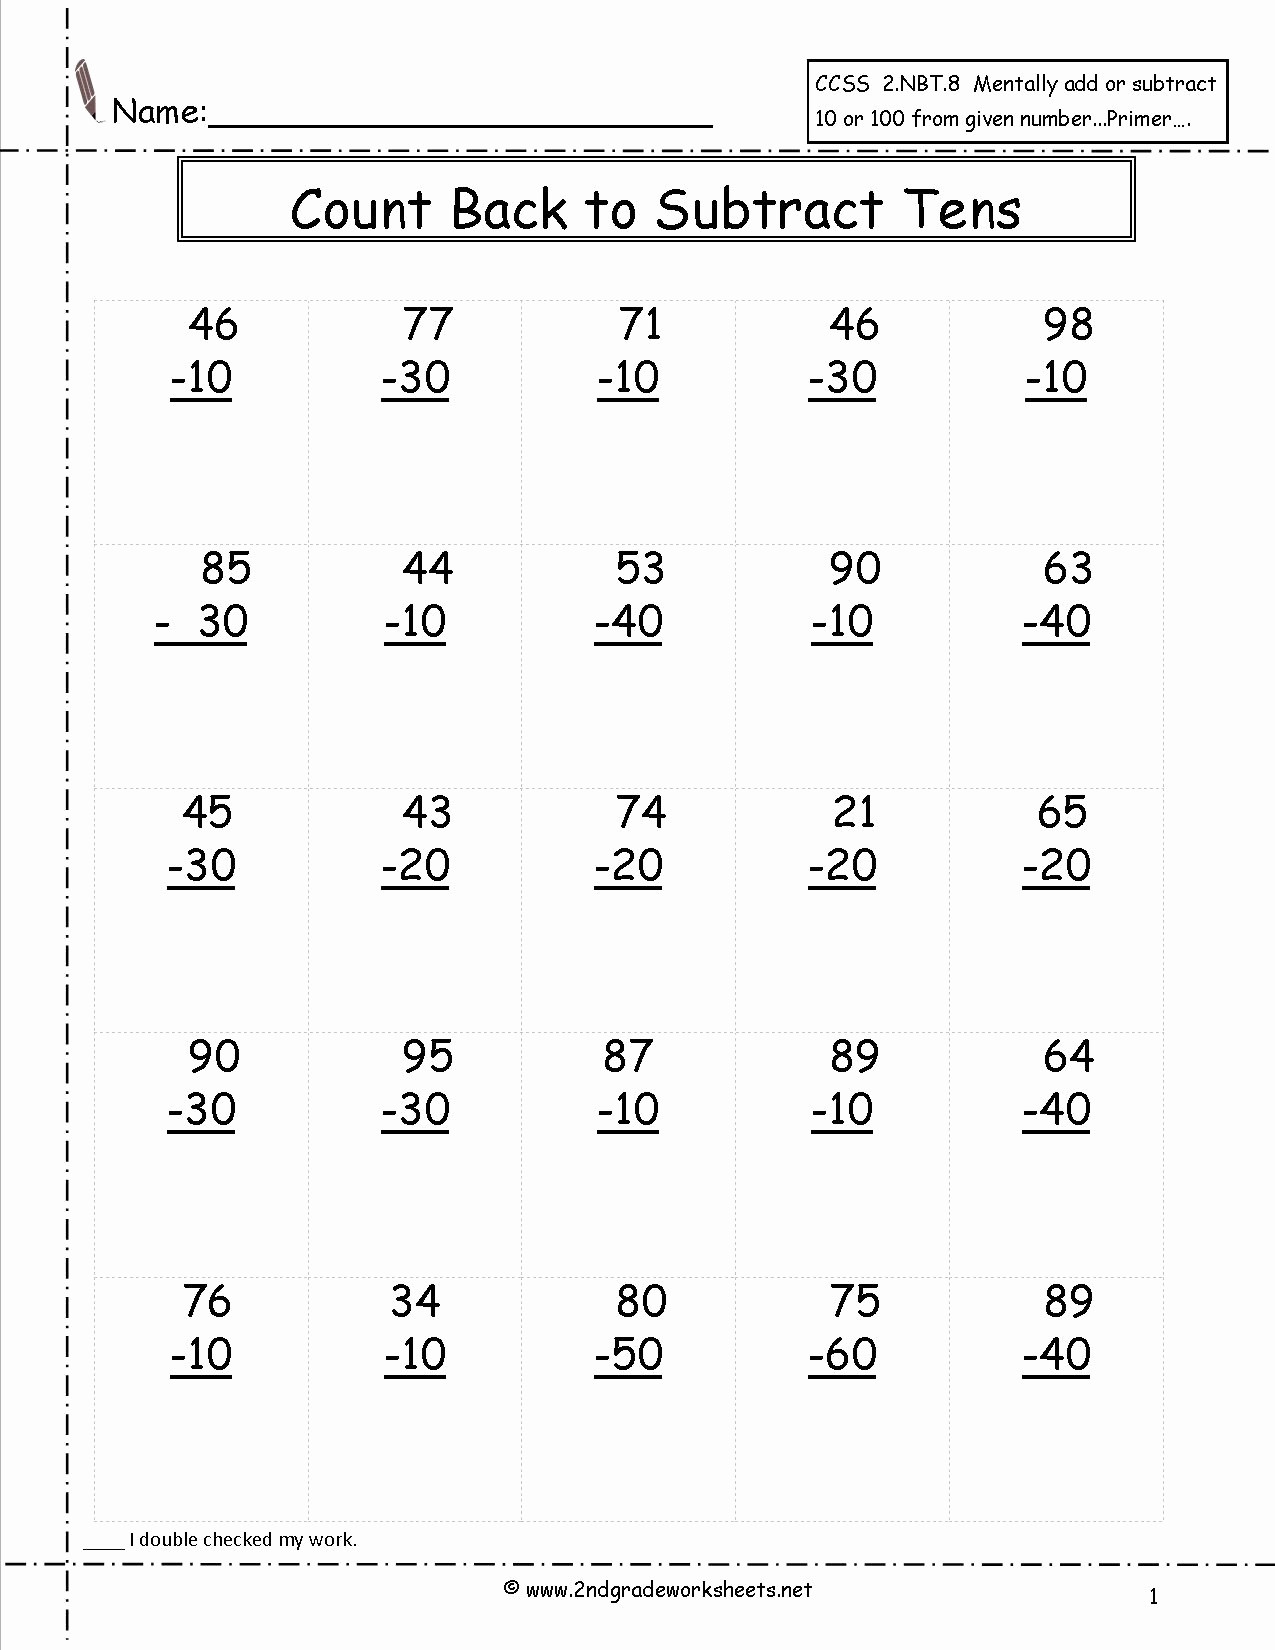 Free Math Worksheets Second Grade 2 Counting Money Counting Money Pennies Nickels Dimes